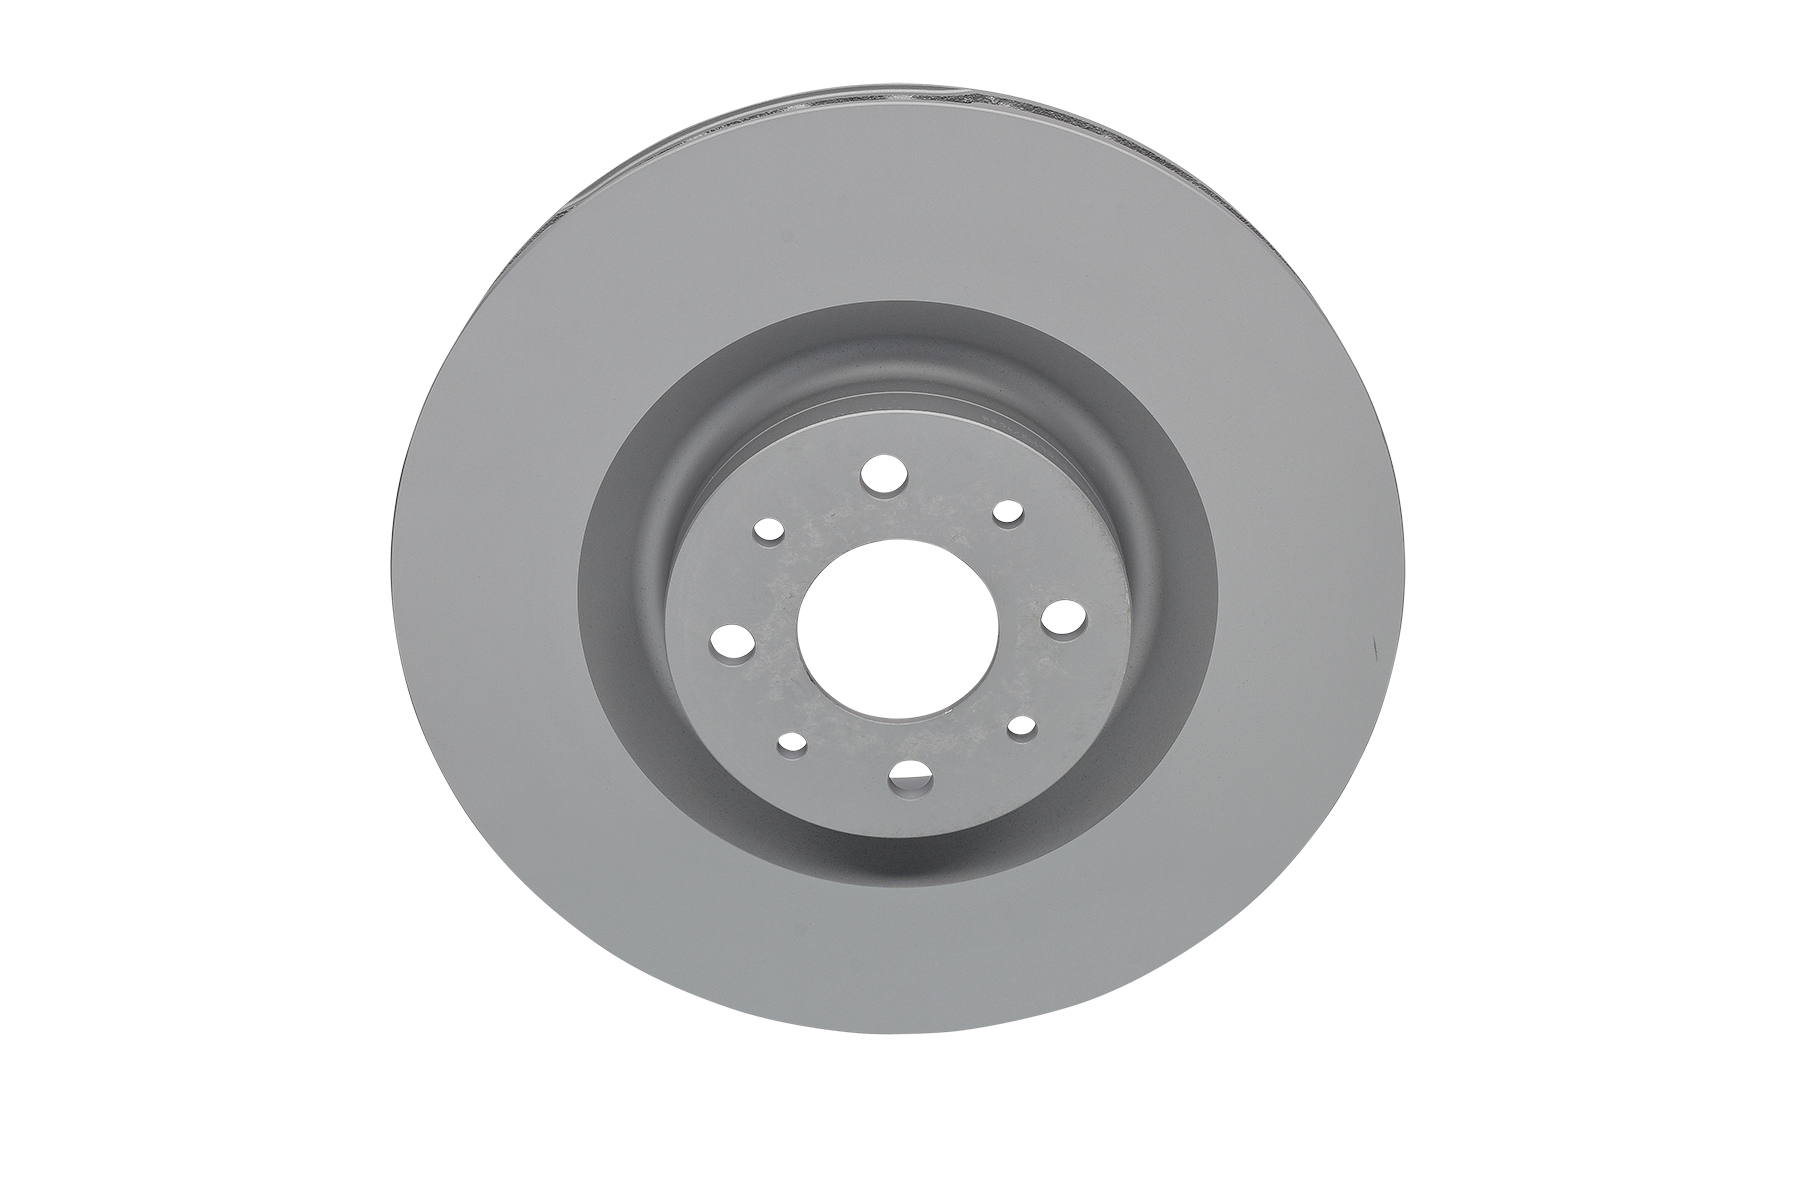 ATE 24.0128-0243.1 Brake disc 305,0x28,0mm, 4x98,0, Vented, Coated, Alloyed/High-carbon